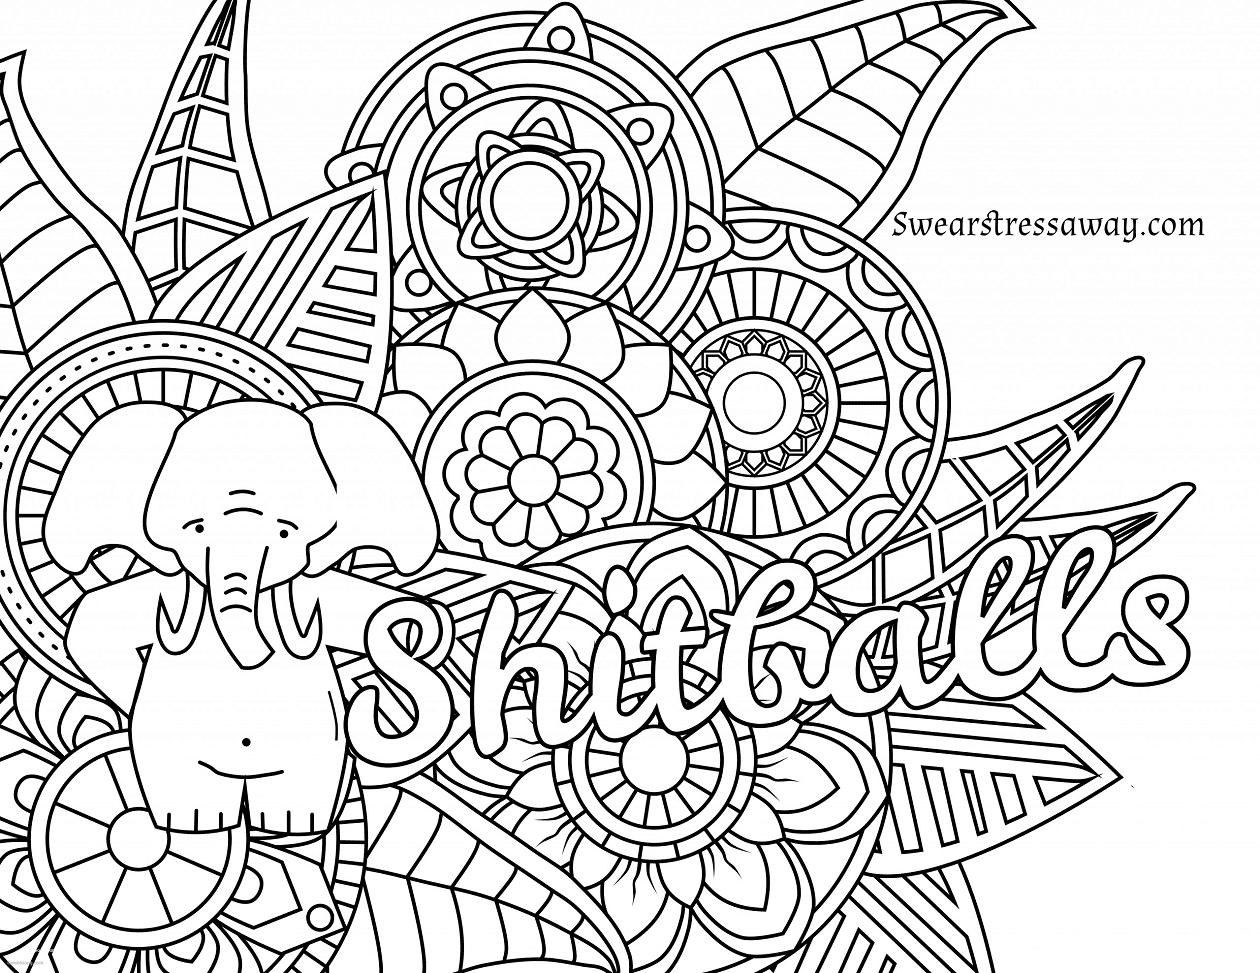 printable-swear-word-for-adult-coloring-page-free-printable-coloring-pages